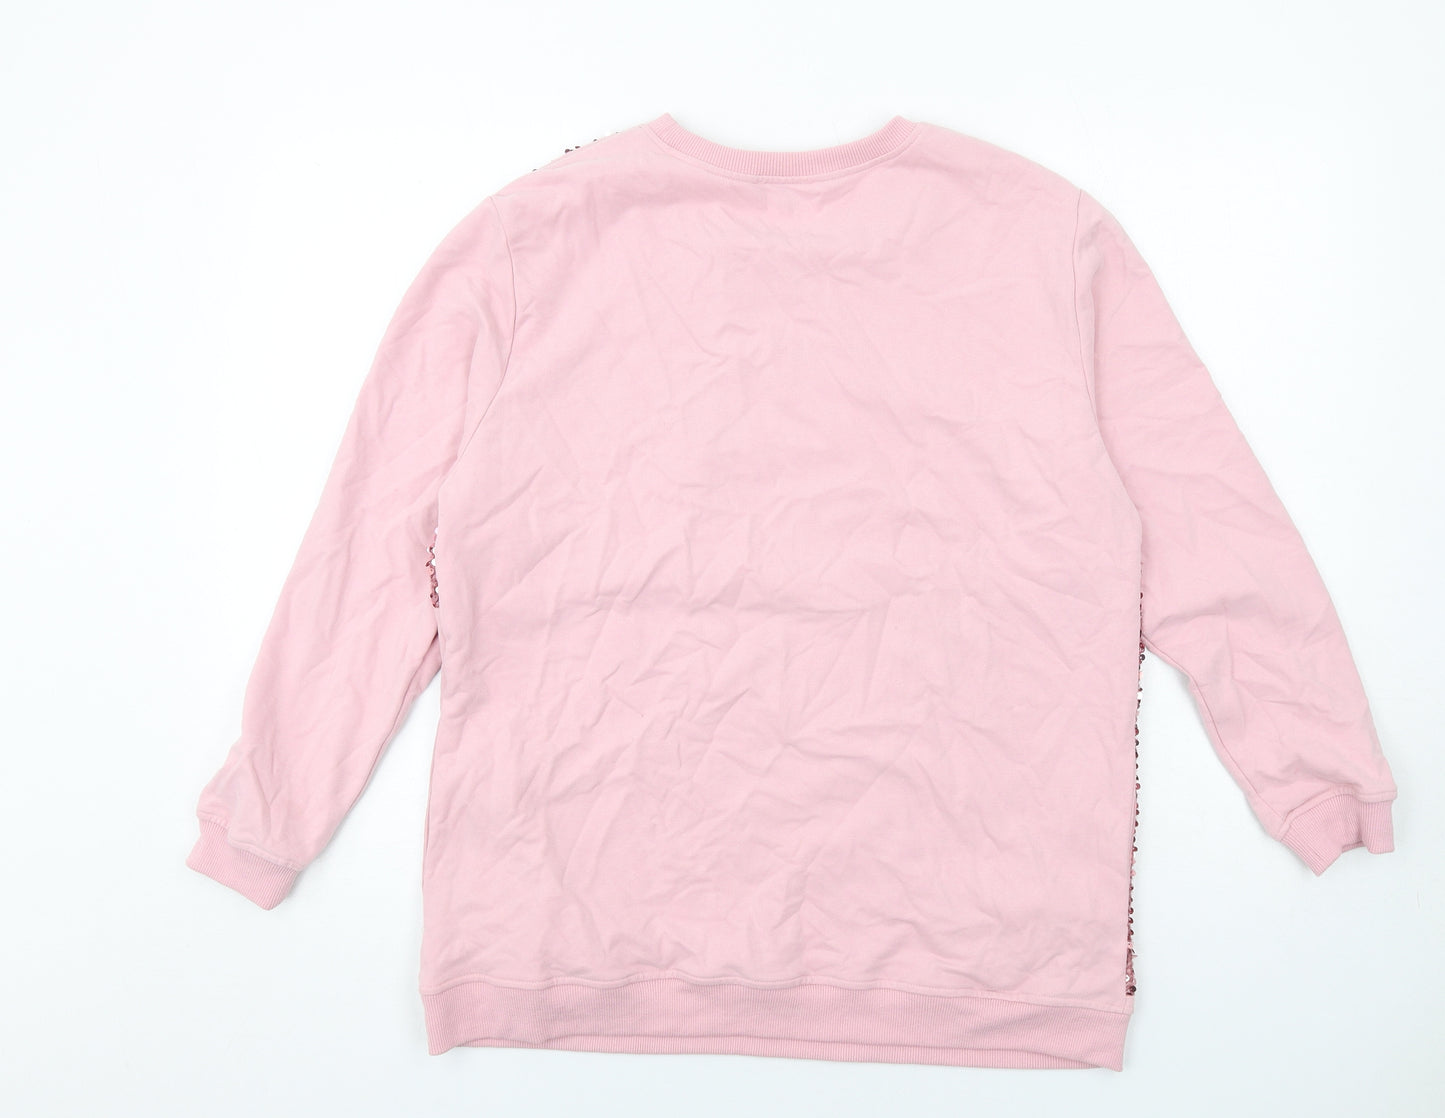 Frank Usher Womens Pink Cotton Pullover Sweatshirt Size S Pullover